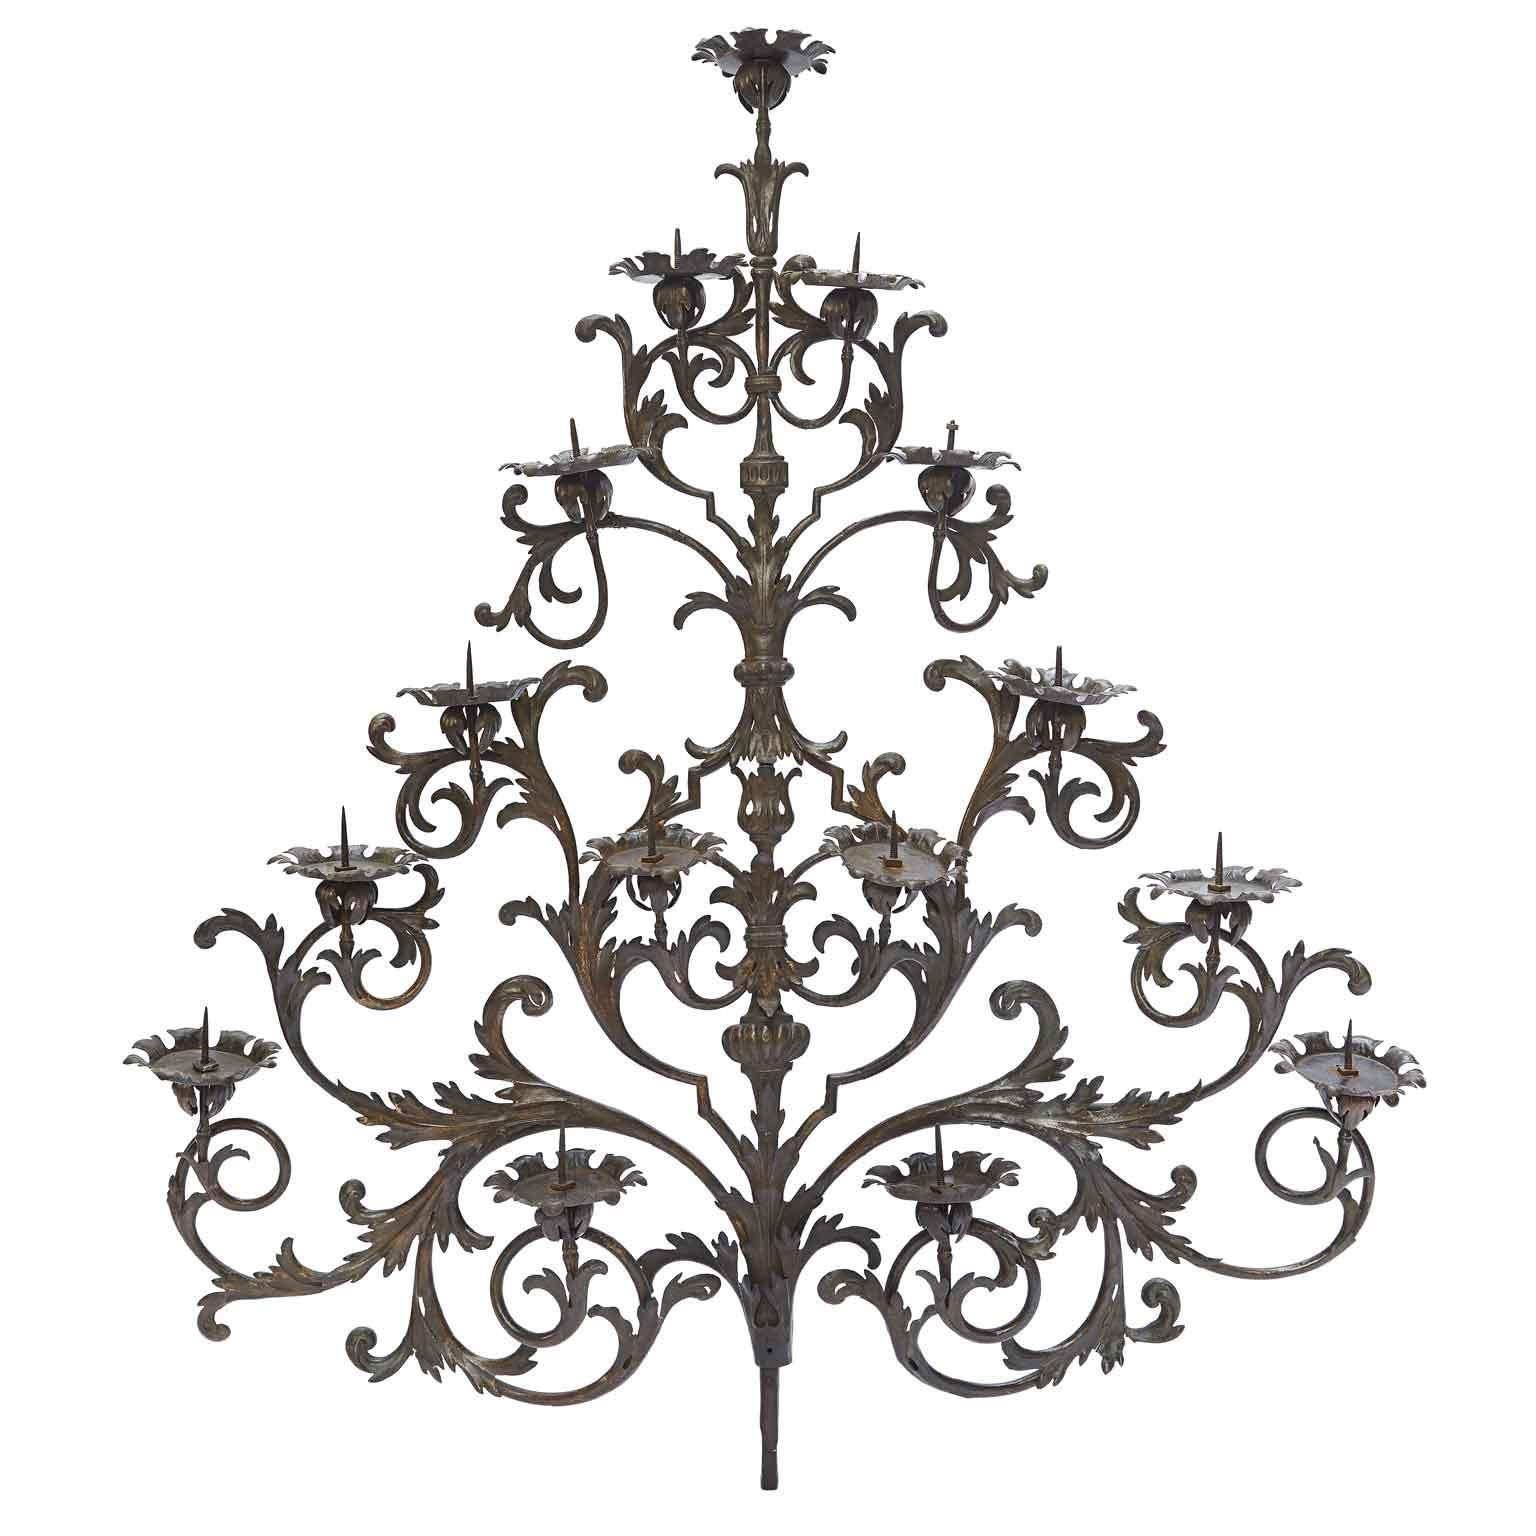 18th Century Italian Wrough Iron Sconce Monumental Fifteen-armed Candelabra with a pyramidal hand-made iron frame decorated with scrolling, curling embossed motivs. This large size unique artwork is a 18th century Italian iron candlestick sconce